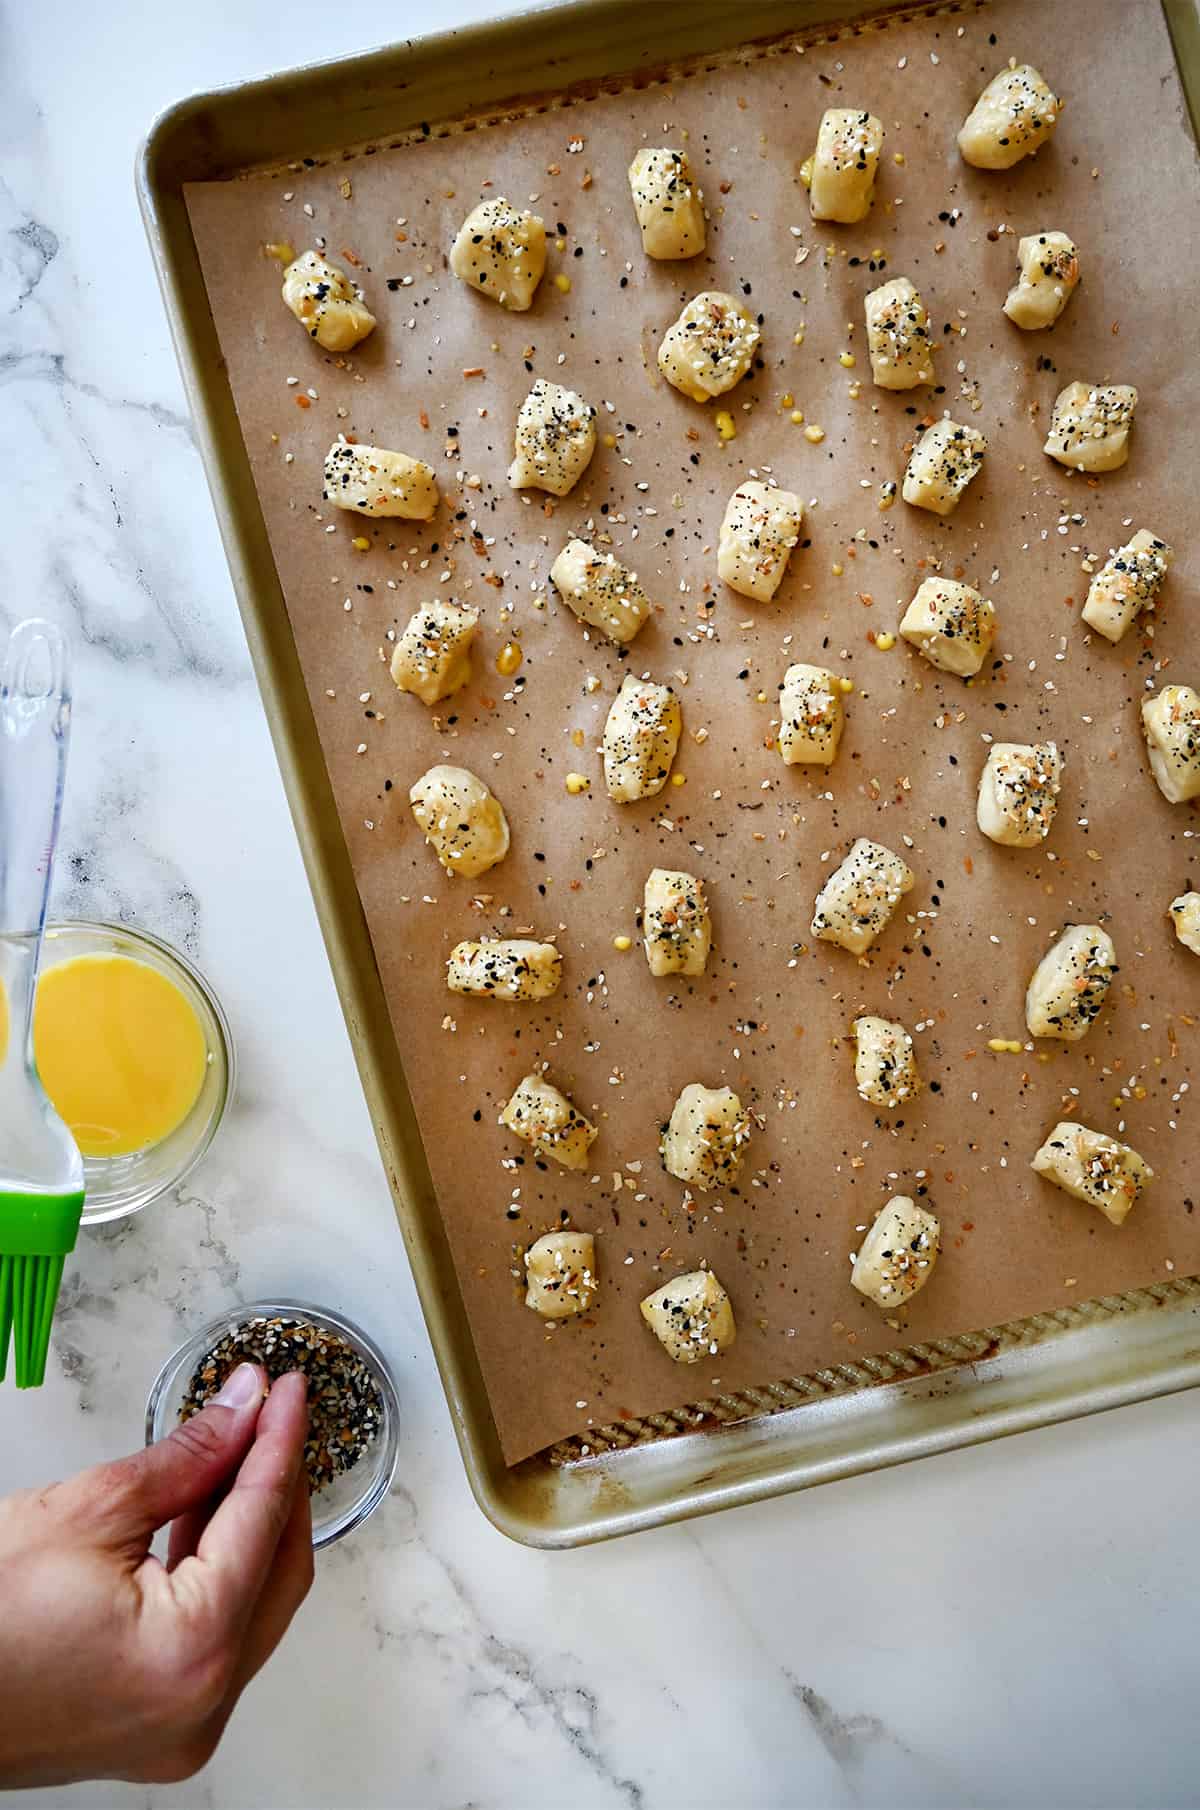 Unbaked dough pieces sprinkled with everything but the bagel seasoning on a parchment paper-lined baking sheet.